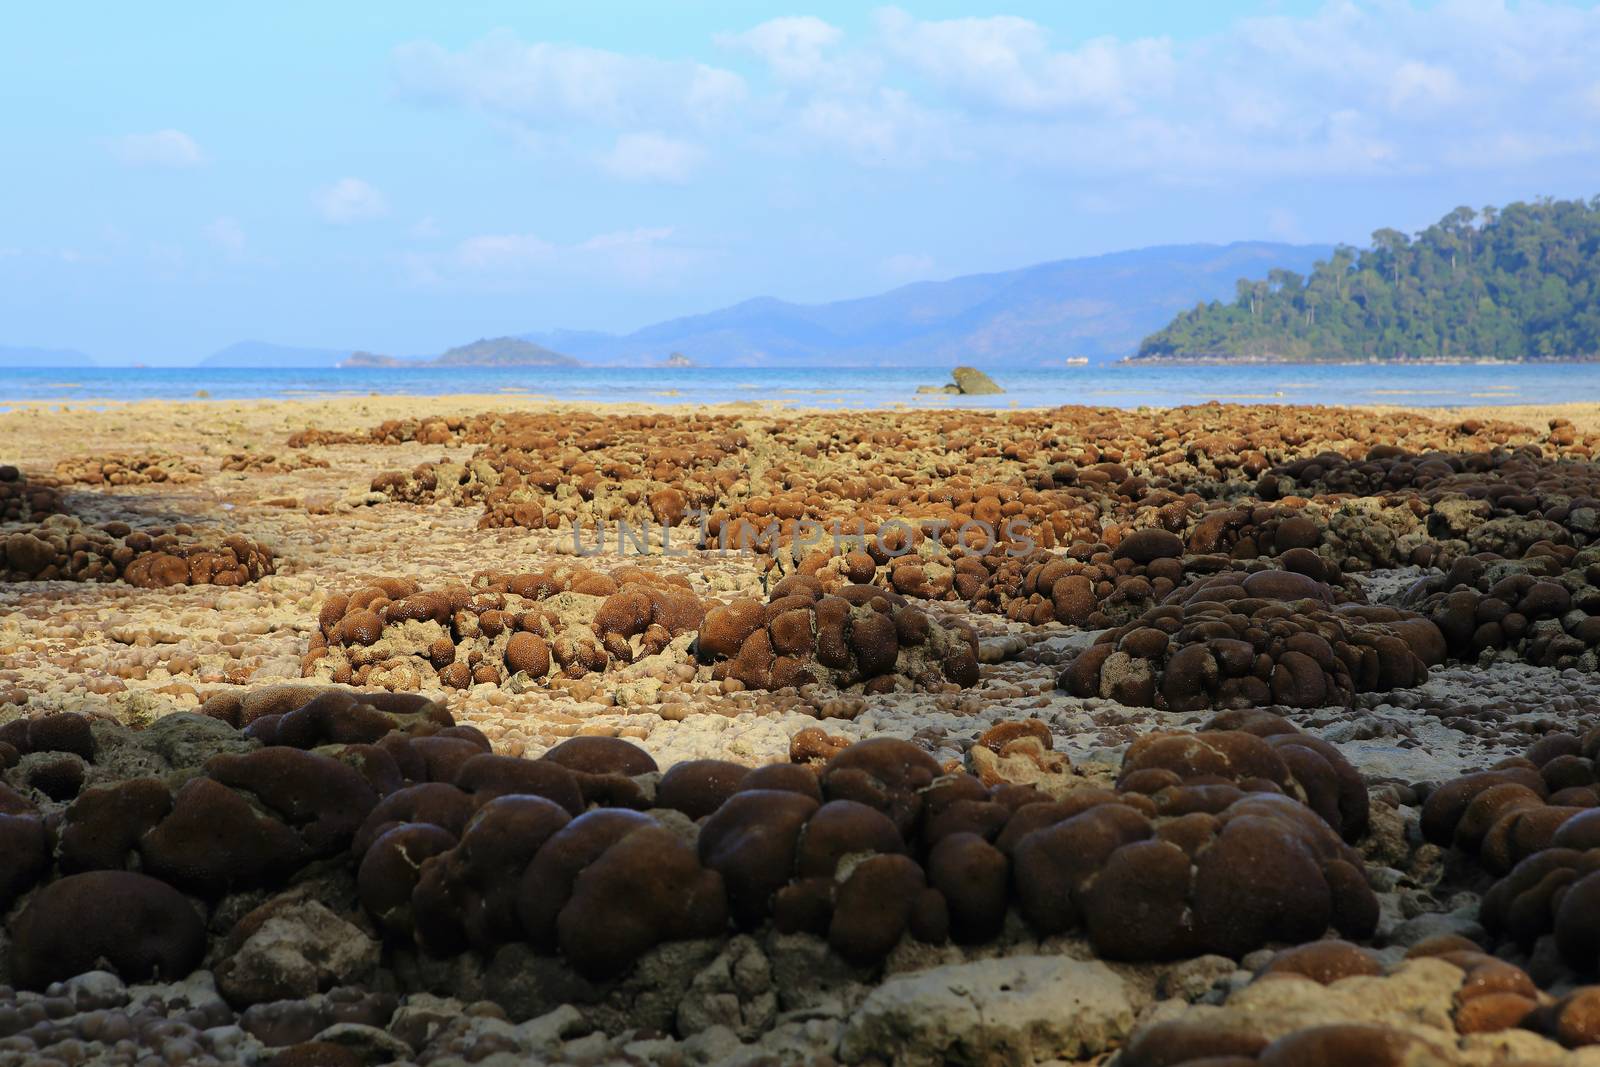 Corals in shallow waters during low tide by rufous